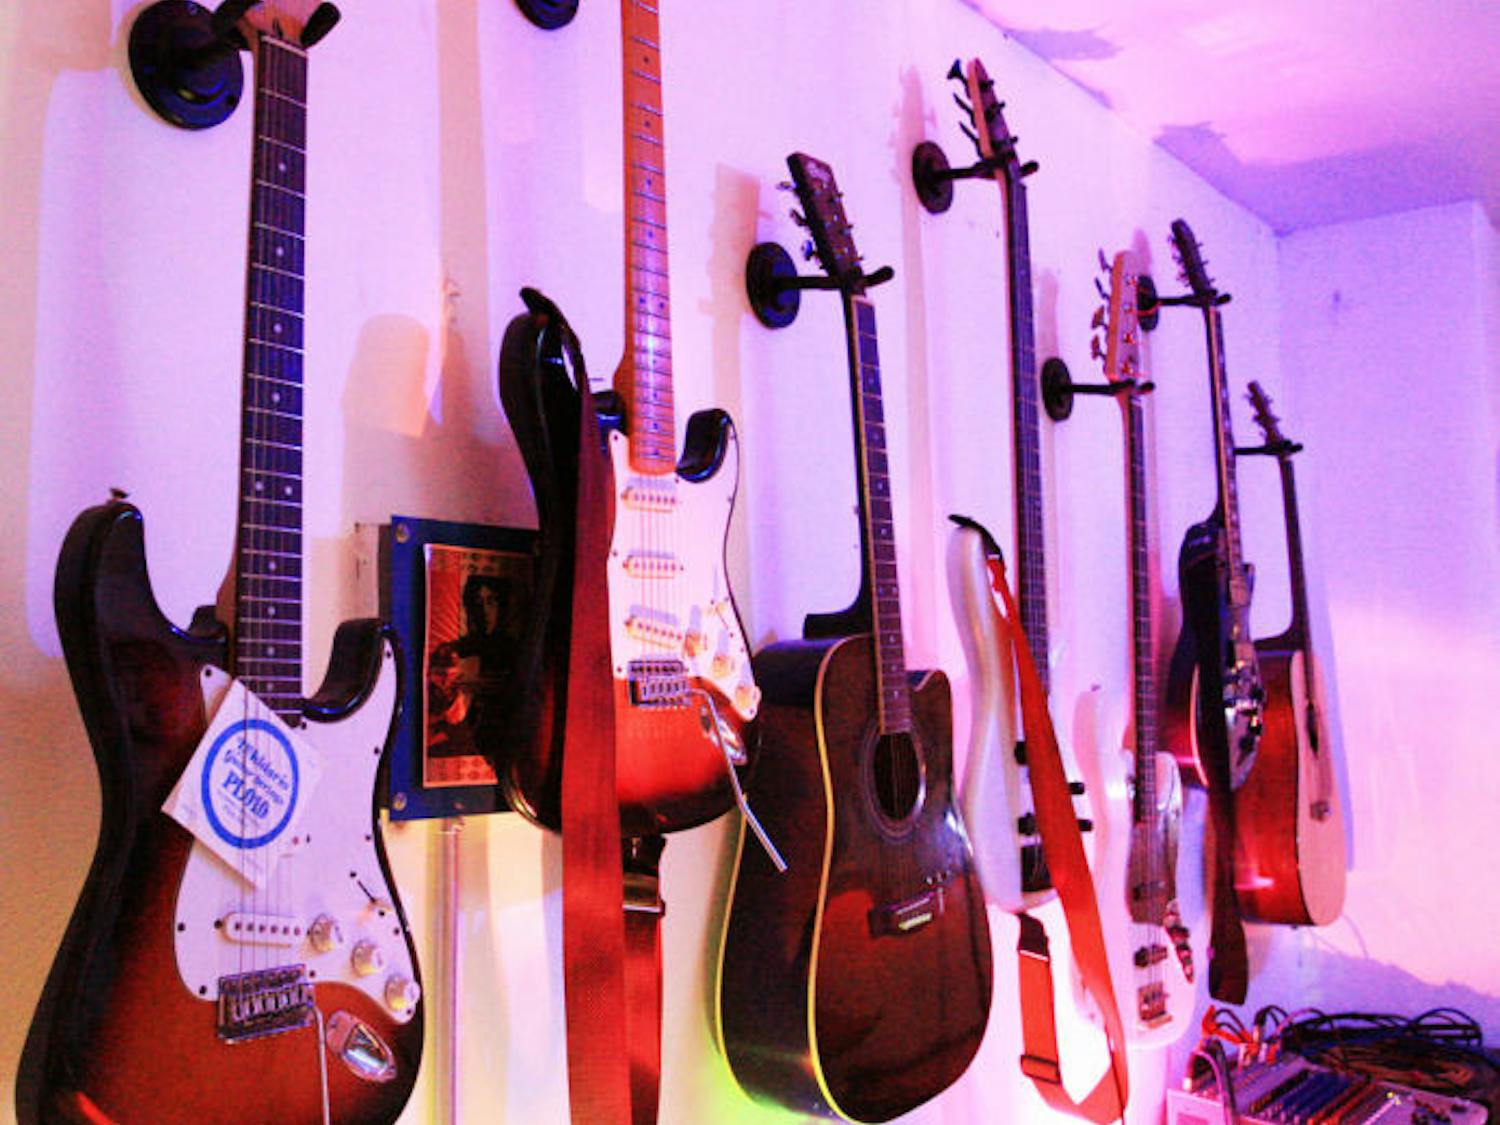 Guitars hang on the wall of The JAM, 817 W. University Ave., waiting to be played by patrons. Anyone can use the bar’s instruments, which include guitars, drums and a piano, to rock on the stage.